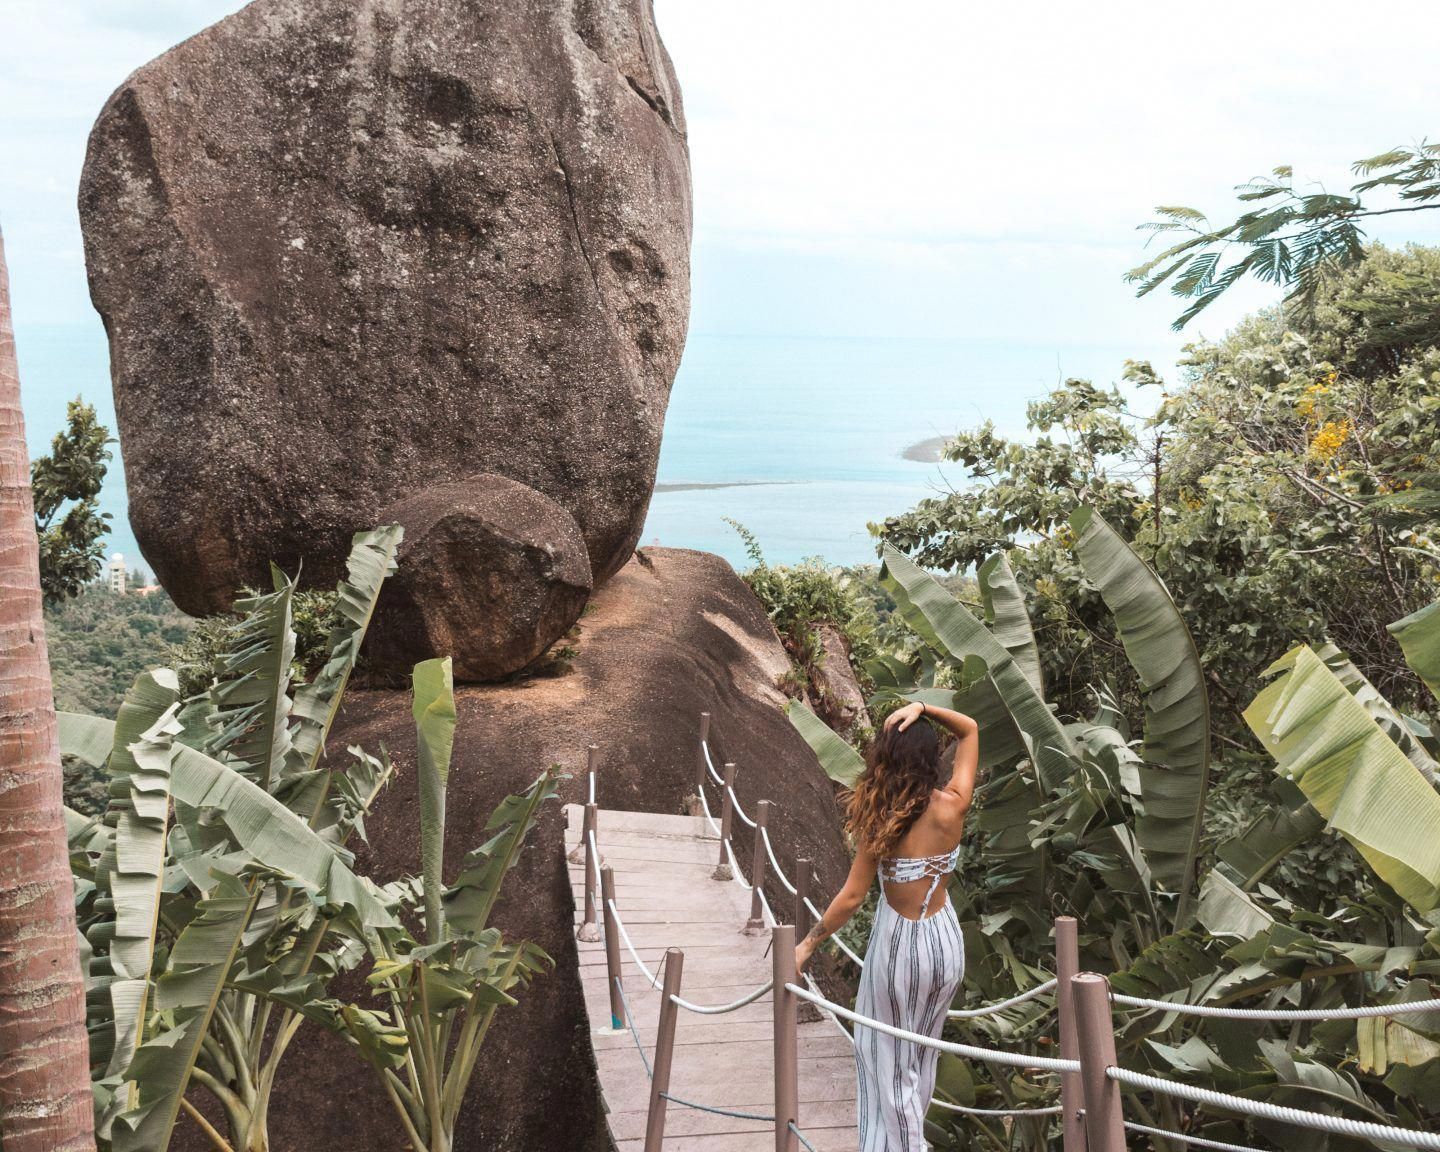 A woman standing on a wooden walkway next to the Overlap Stone in Koh Samui.